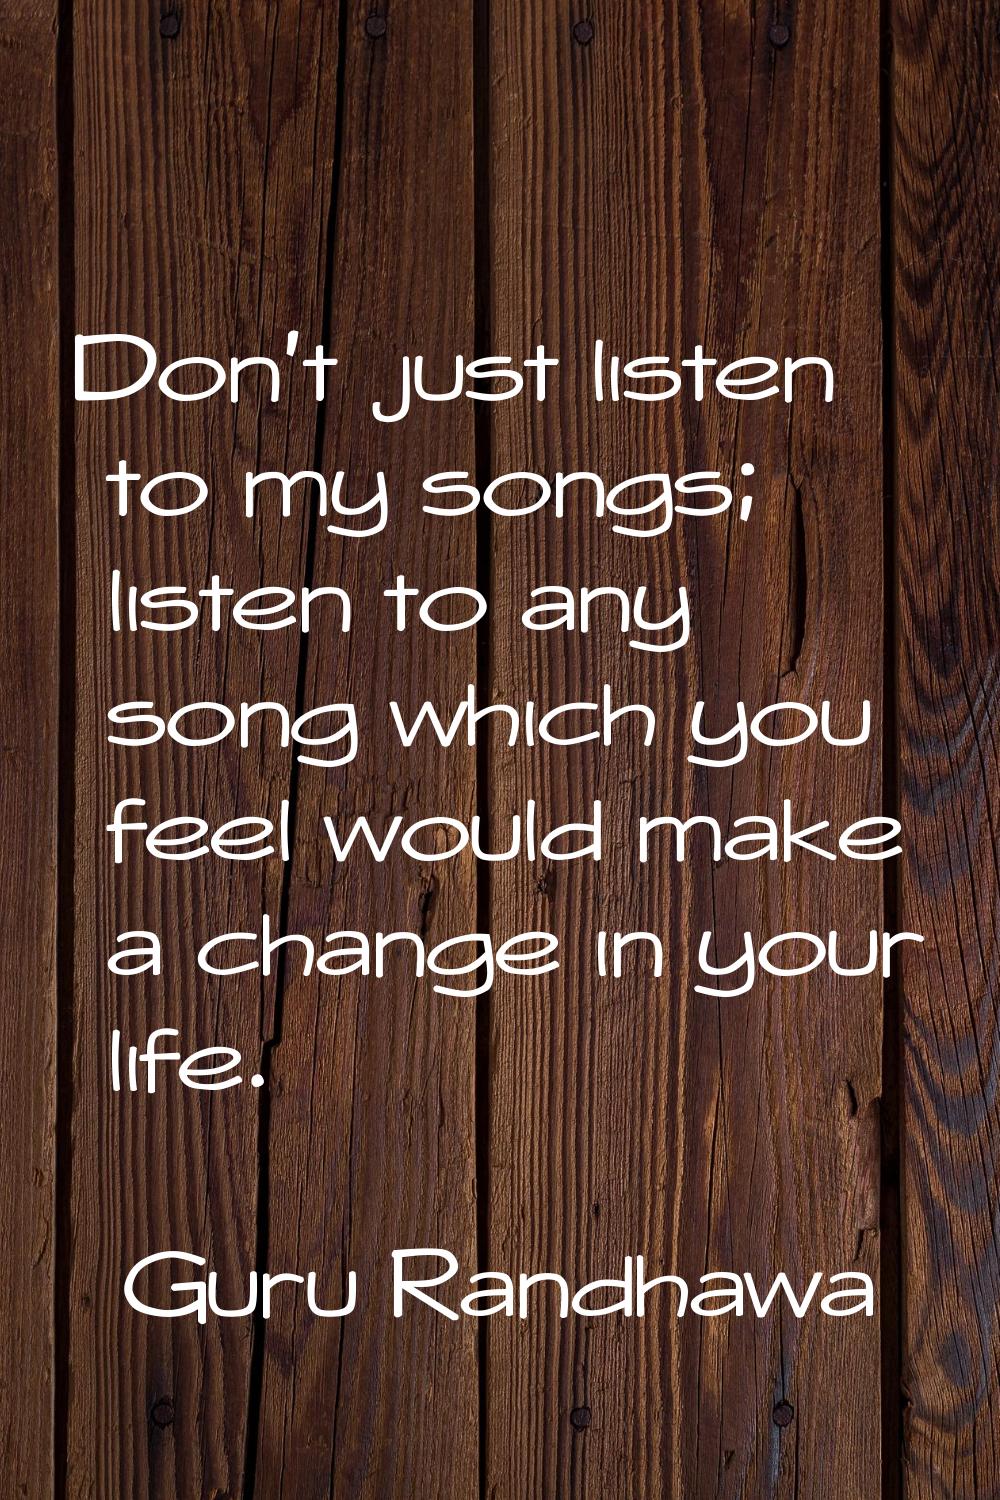 Don't just listen to my songs; listen to any song which you feel would make a change in your life.